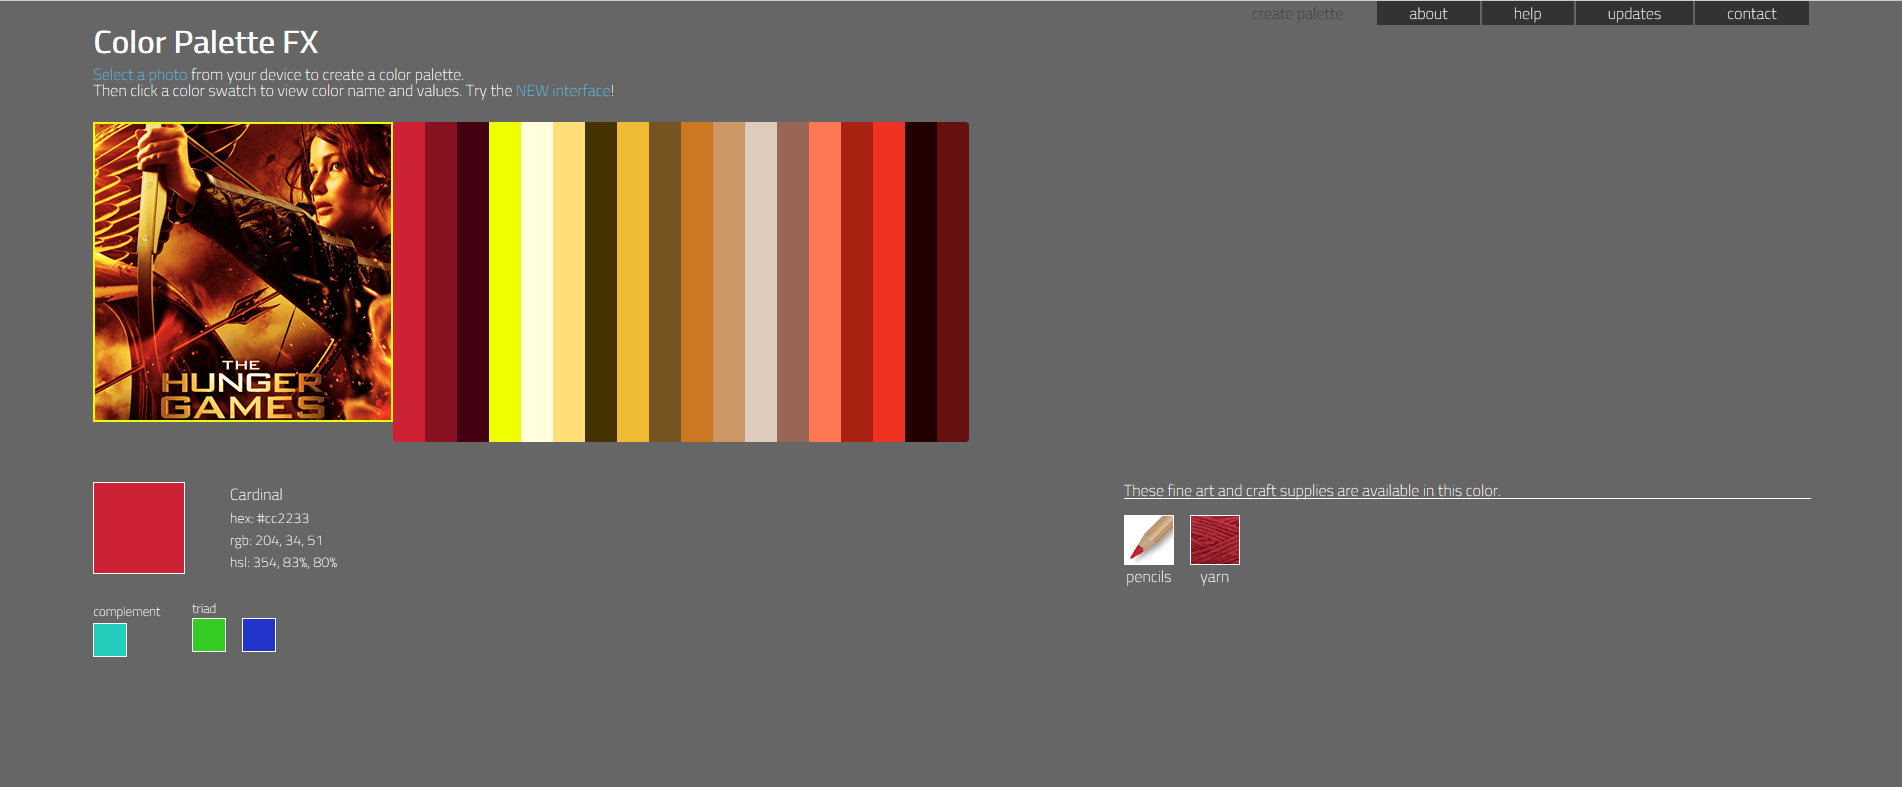 the-hunger-games-theme-park_palette.png